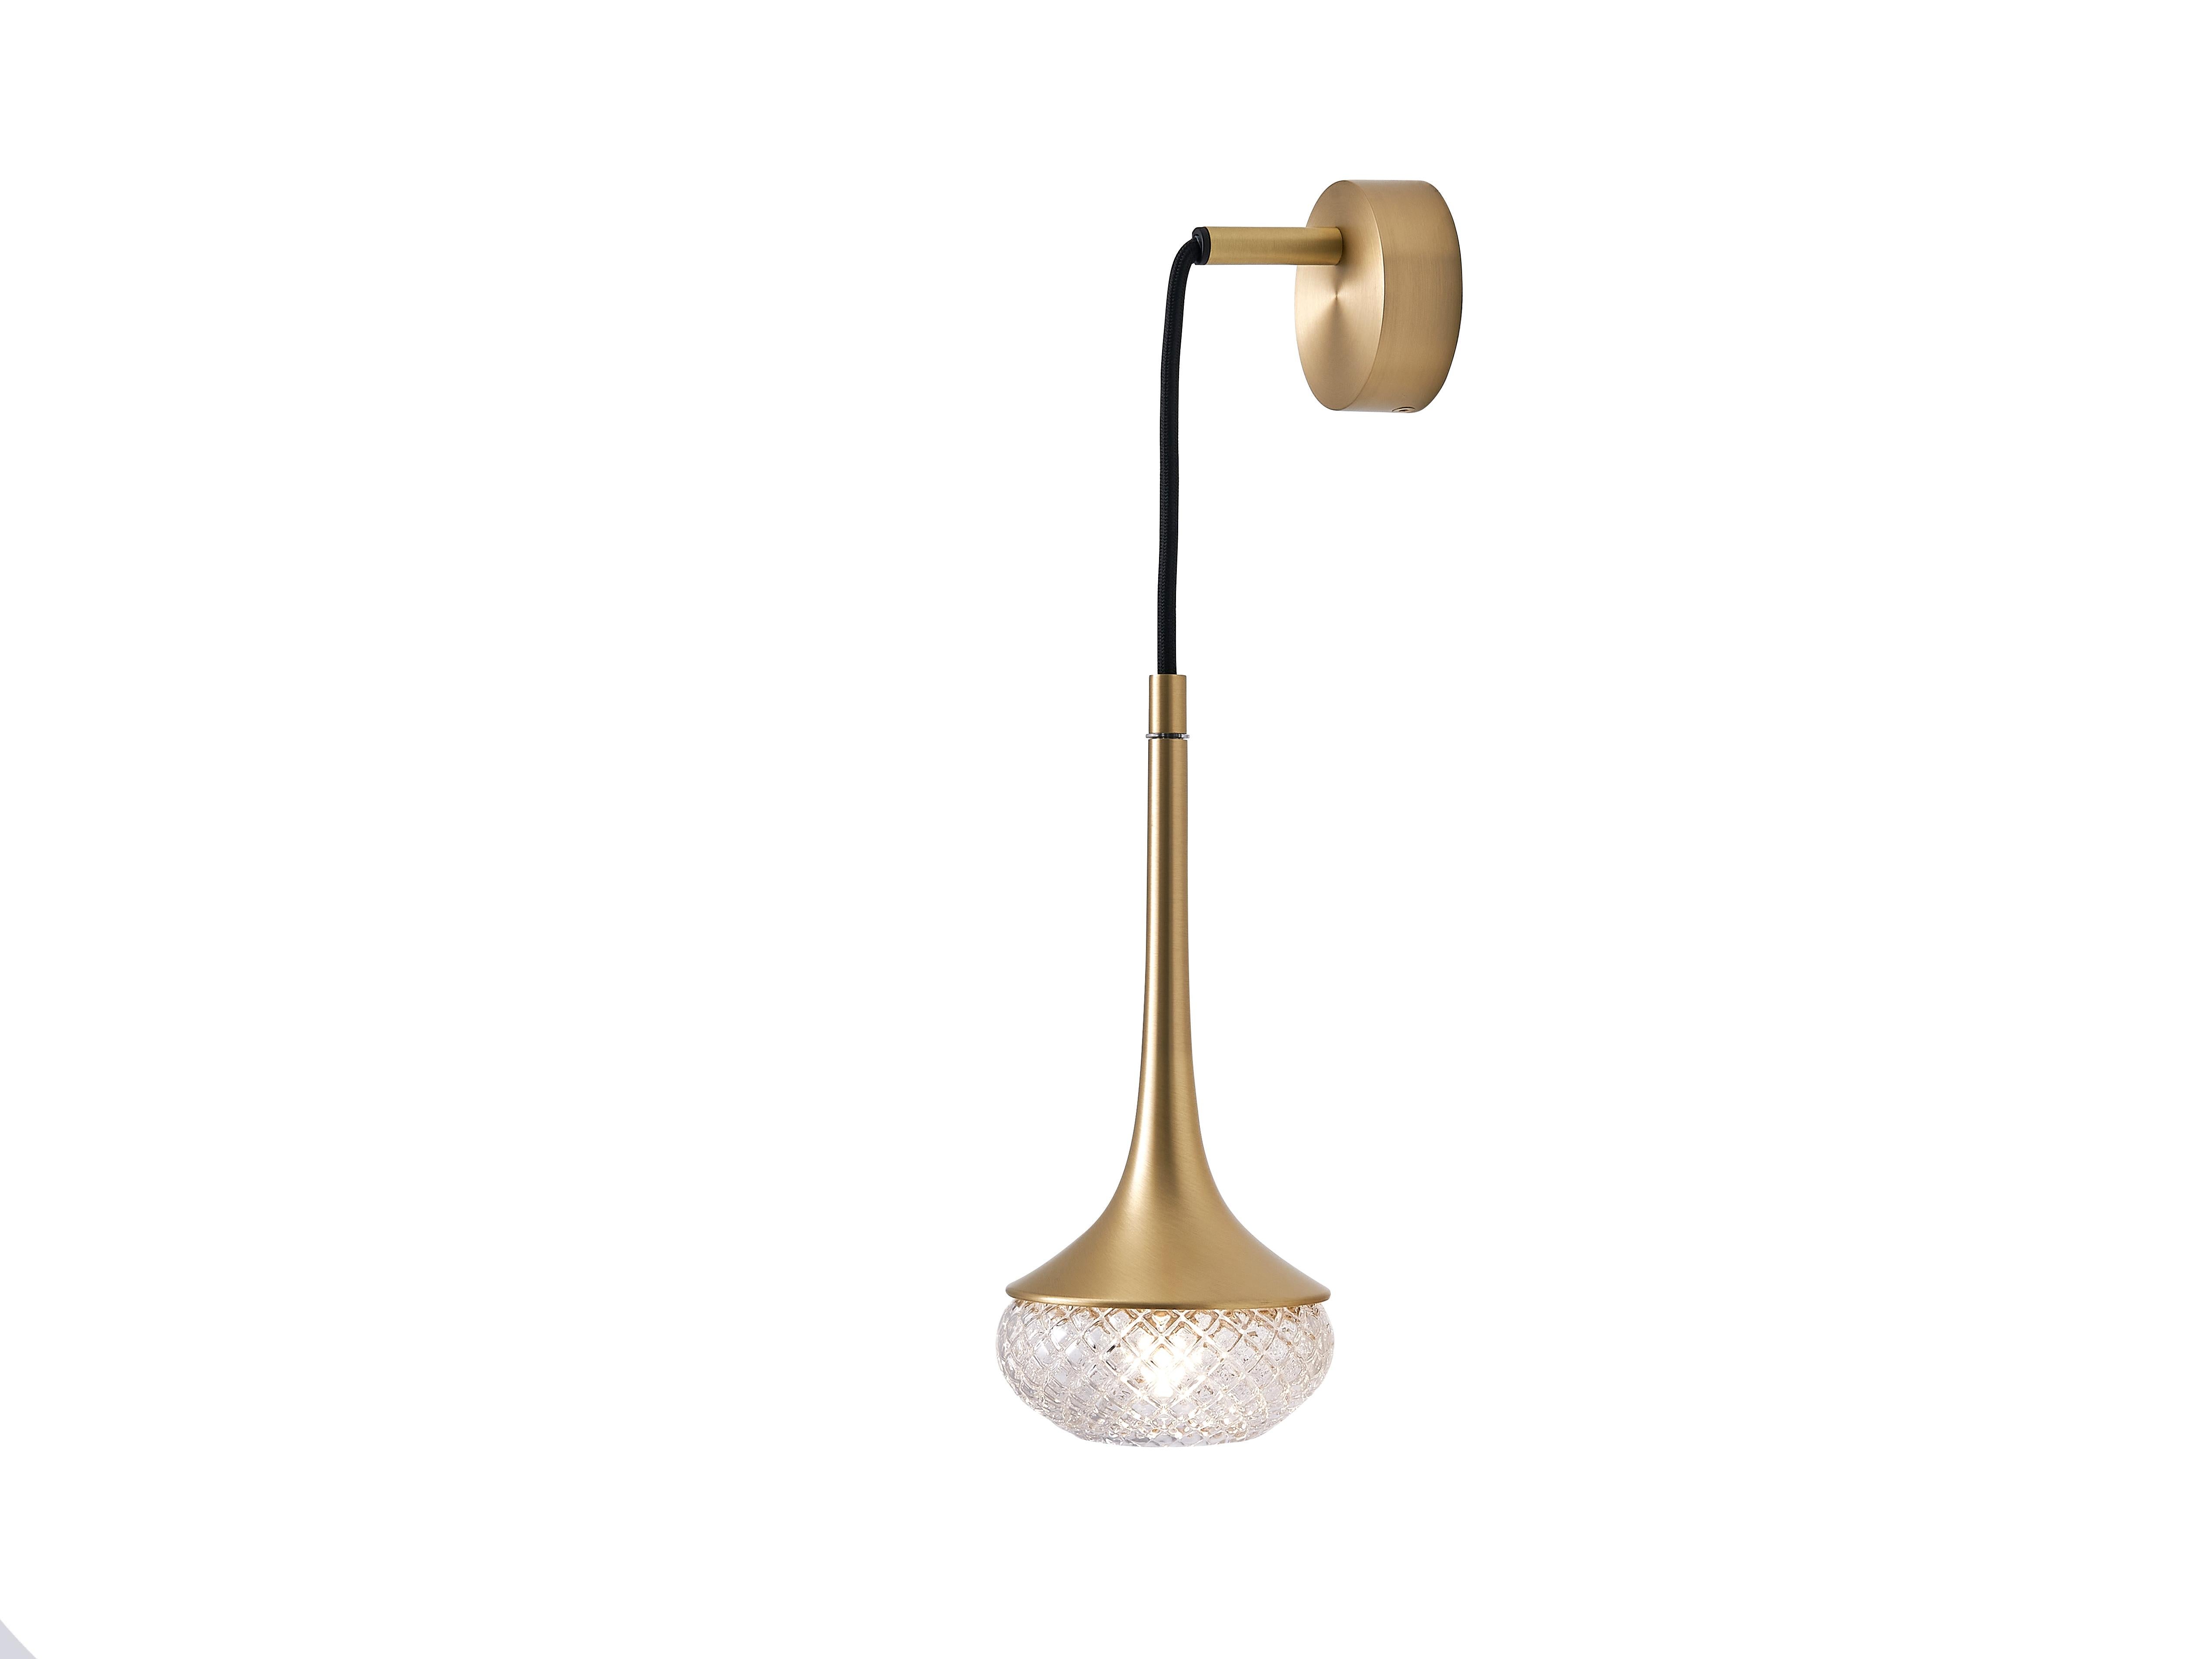 Flea Brass Wall Light by Emilie Cathelineau
Dimensions: D11.5 x W15 X H33.5 cm
Materials: Solid brass,Mouth-blown glass,Textile cable
Others finishes and dimensions are available.

All our lamps can be wired according to each country. If sold